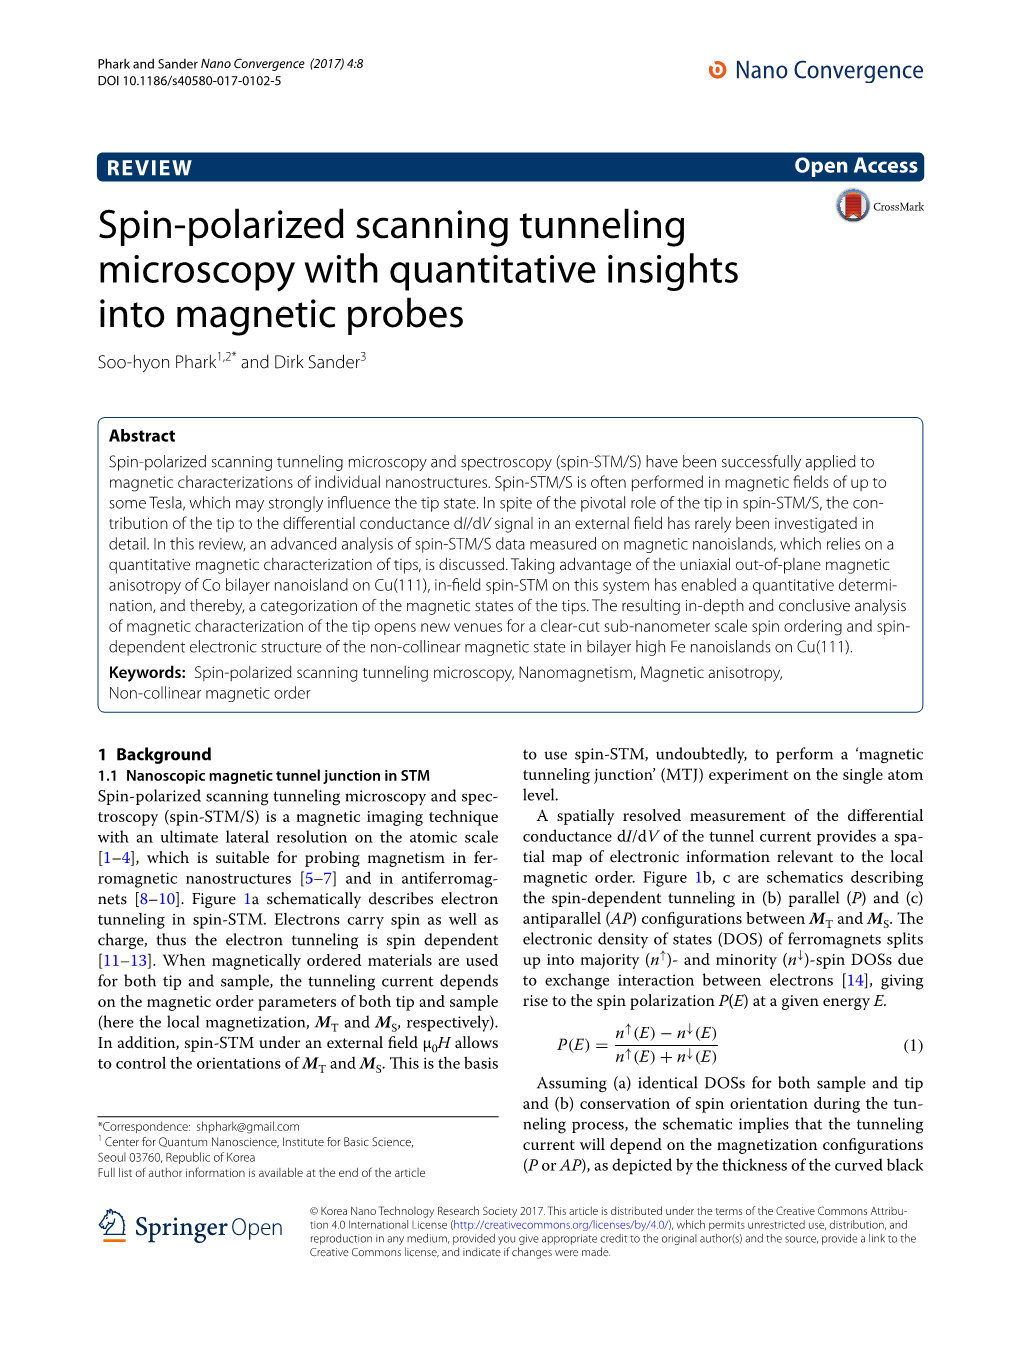 Spin-Polarized Scanning Tunneling Microscopy with Quantitative